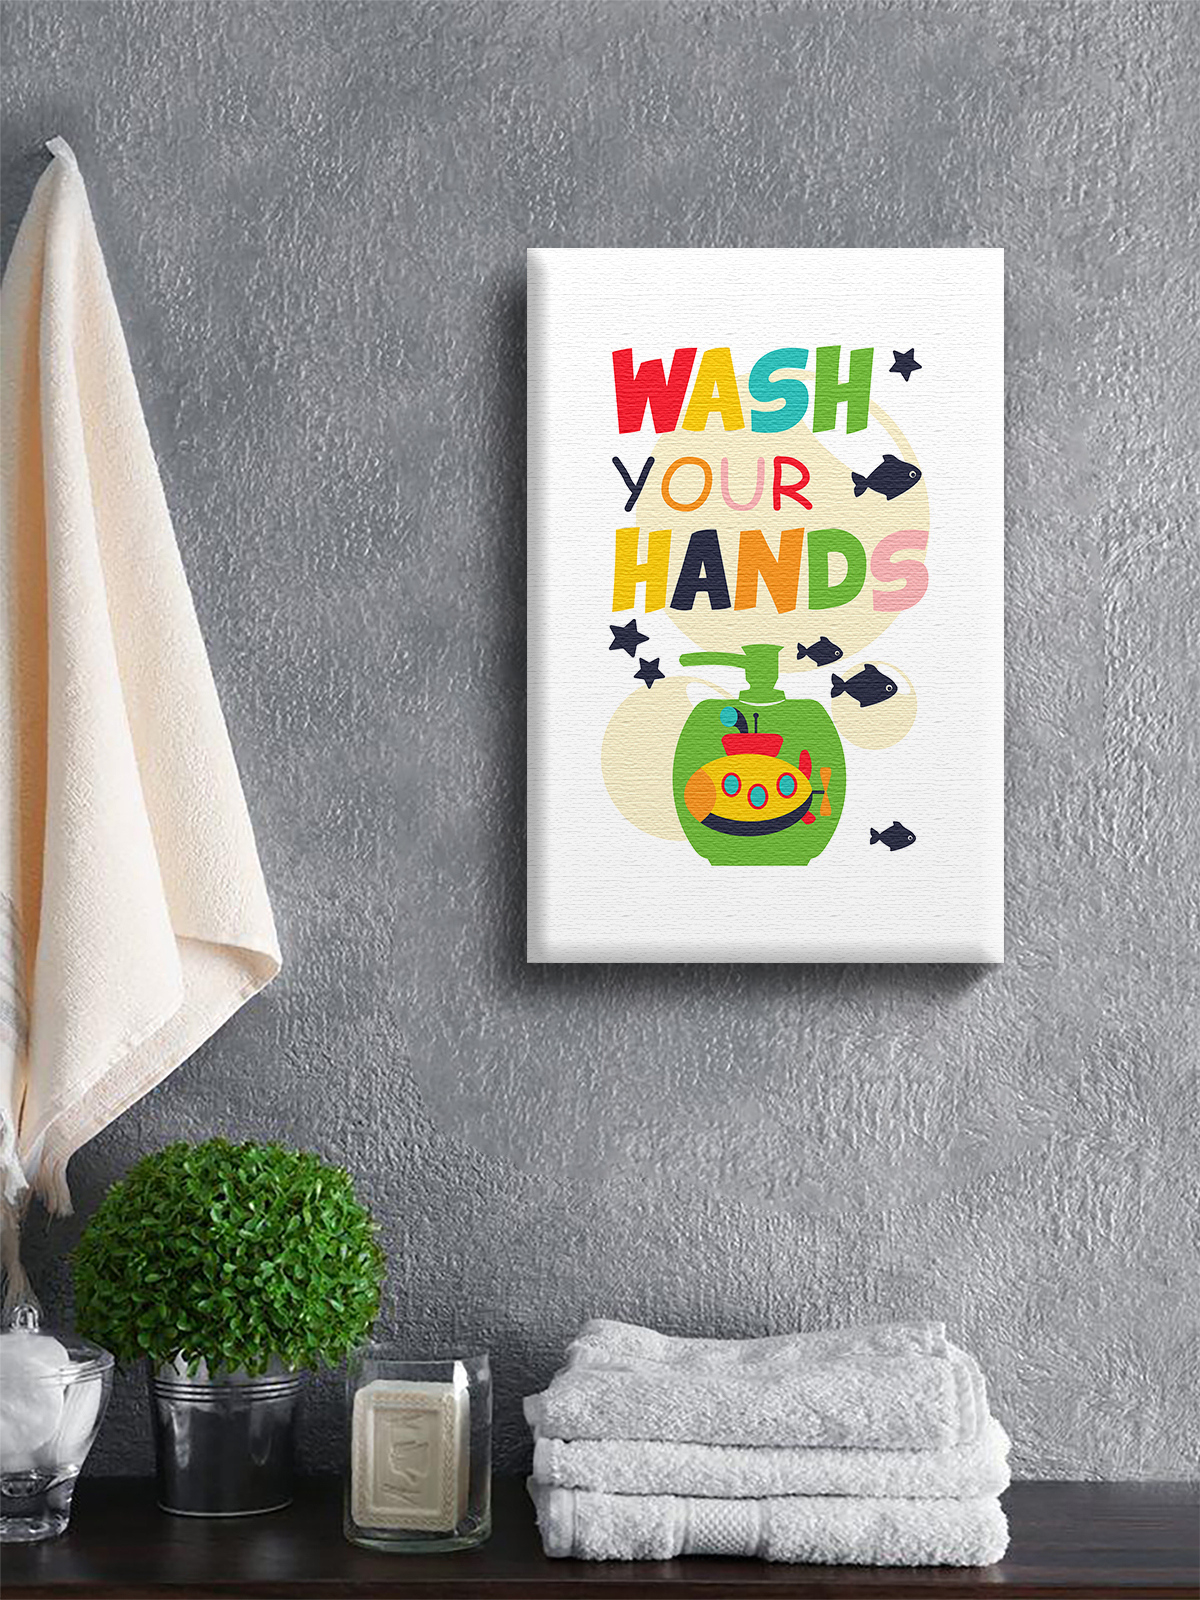 Awkward Styles Wash Your Hands Printed Quotes for Children Wash Your Hands Canvas Wall Decor Colorful Art Decals Wall Art for Home Gifts Kids Bathroom Decor Bathroom Framed Wall Art for Children - image 2 of 7